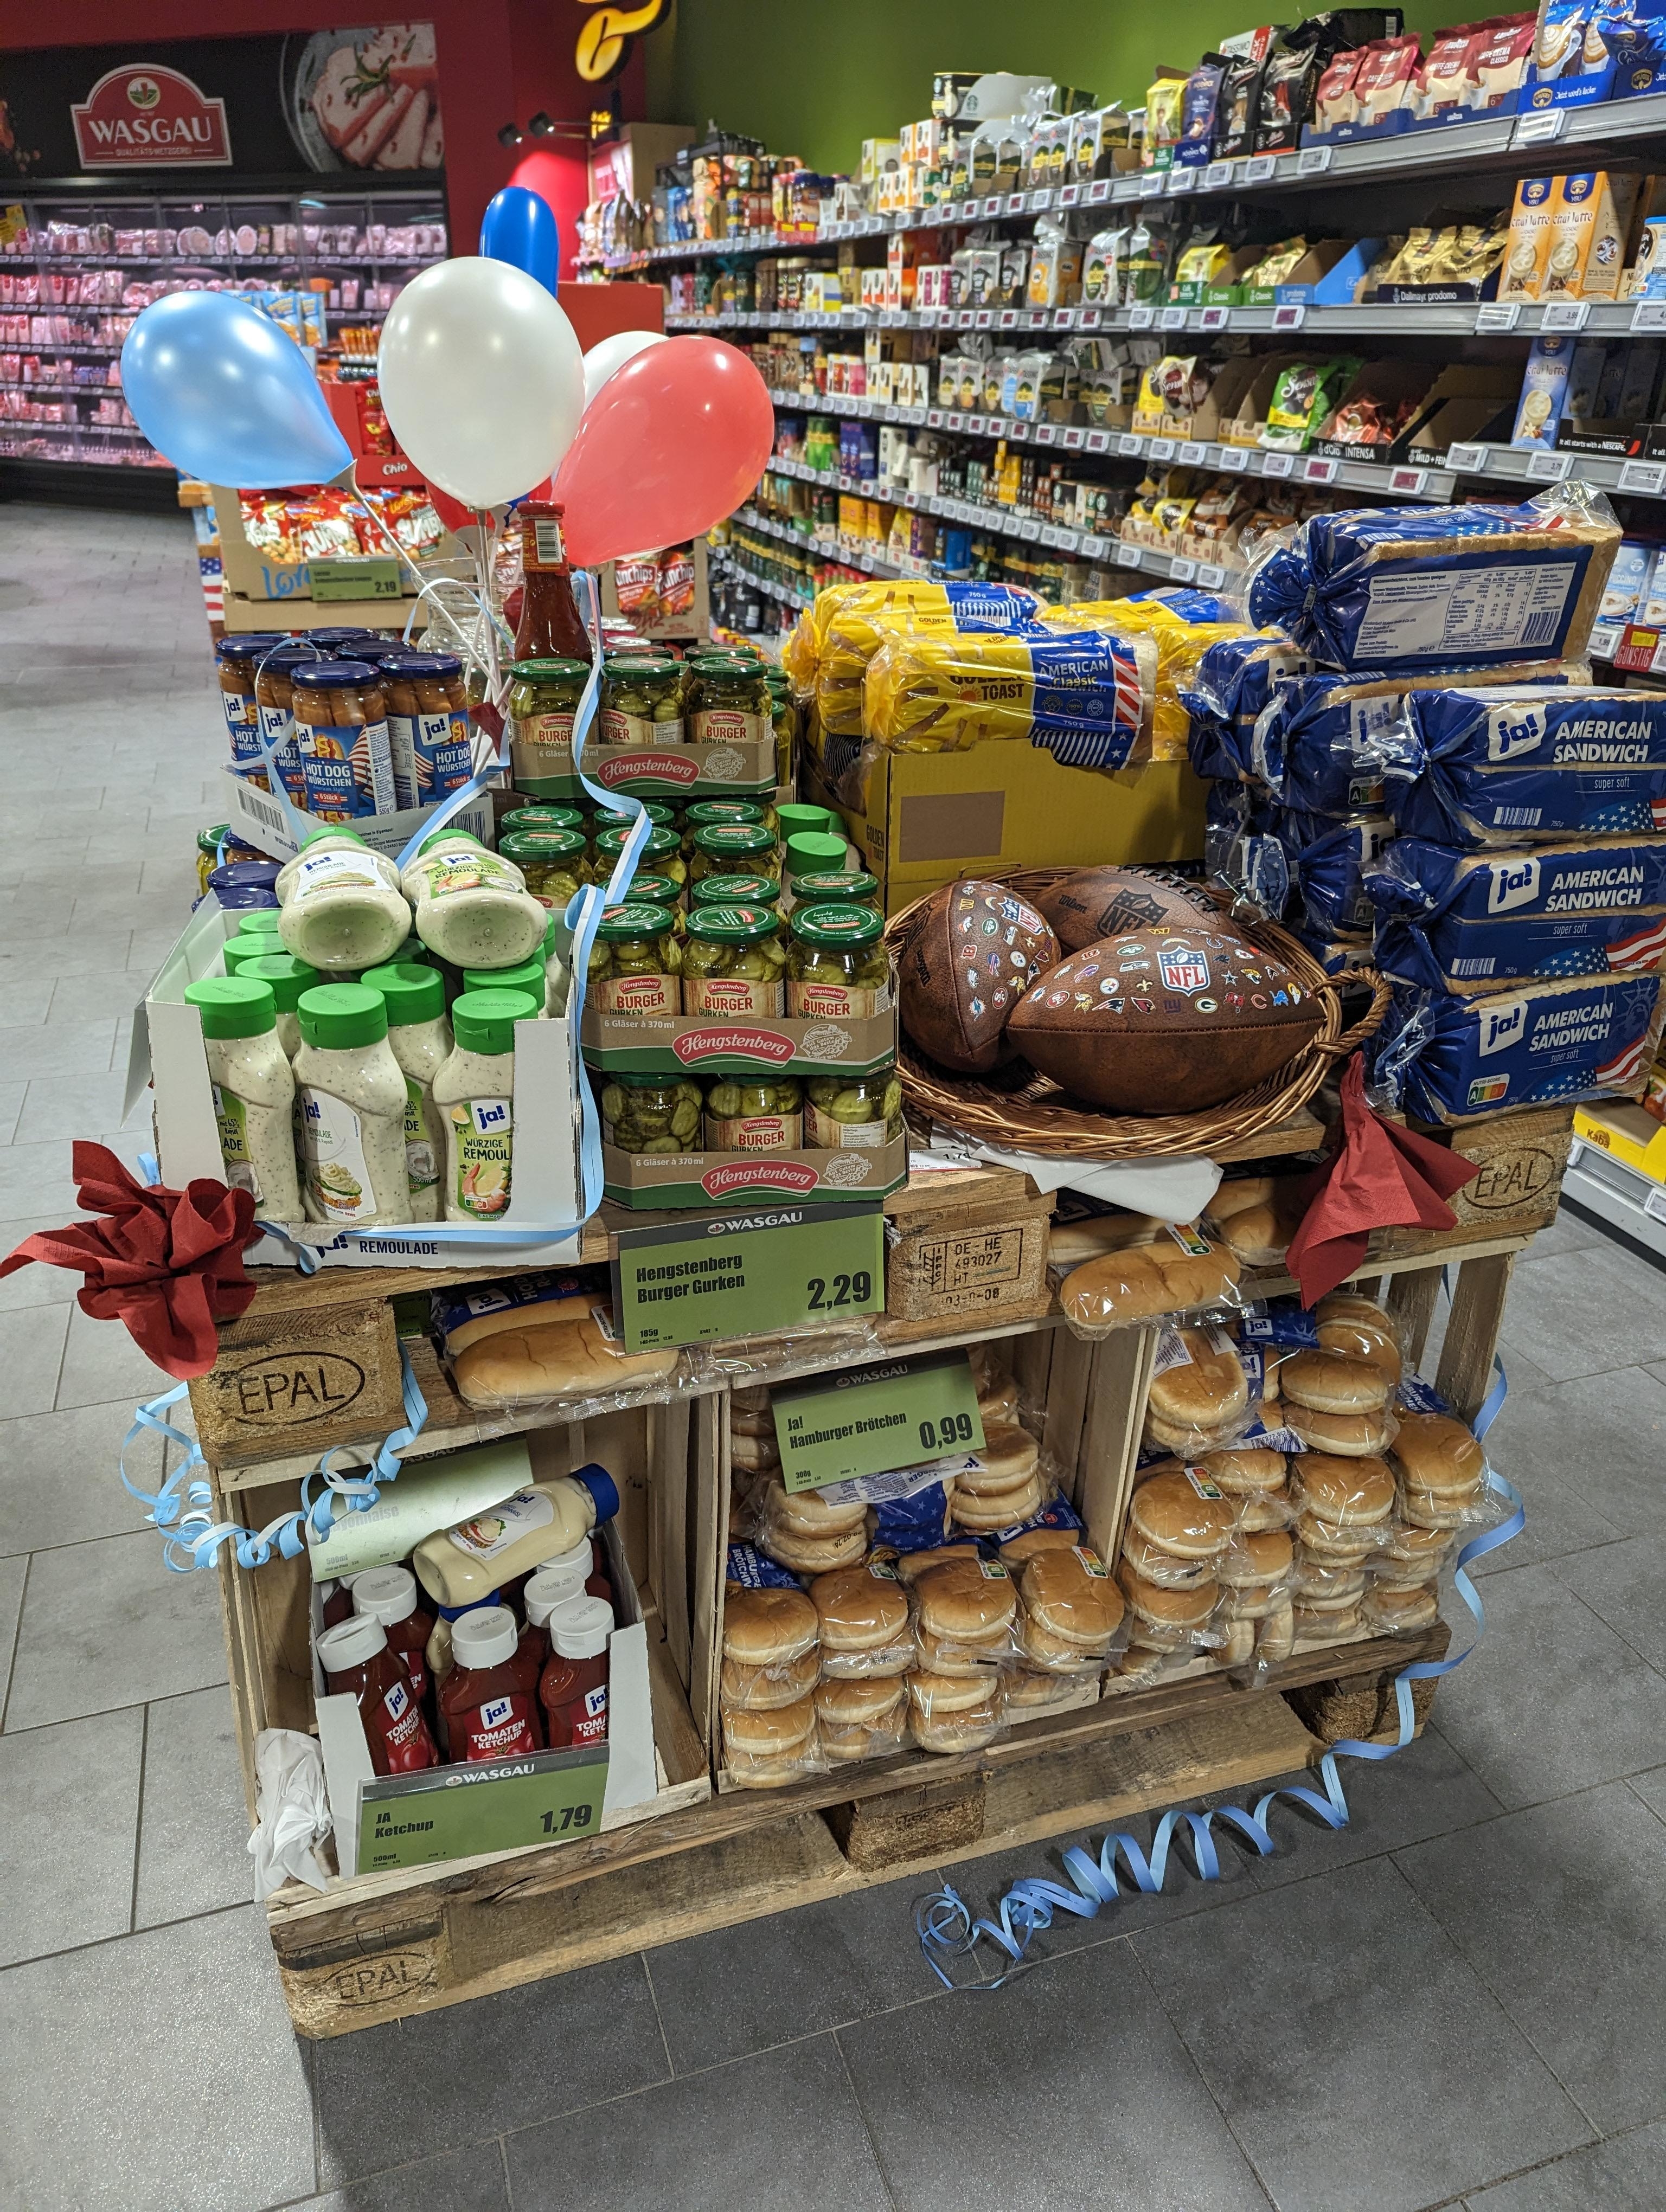 A store display with hamburger buns, ketchup, loaves of bread, pickles, hot dogs, and other condiments